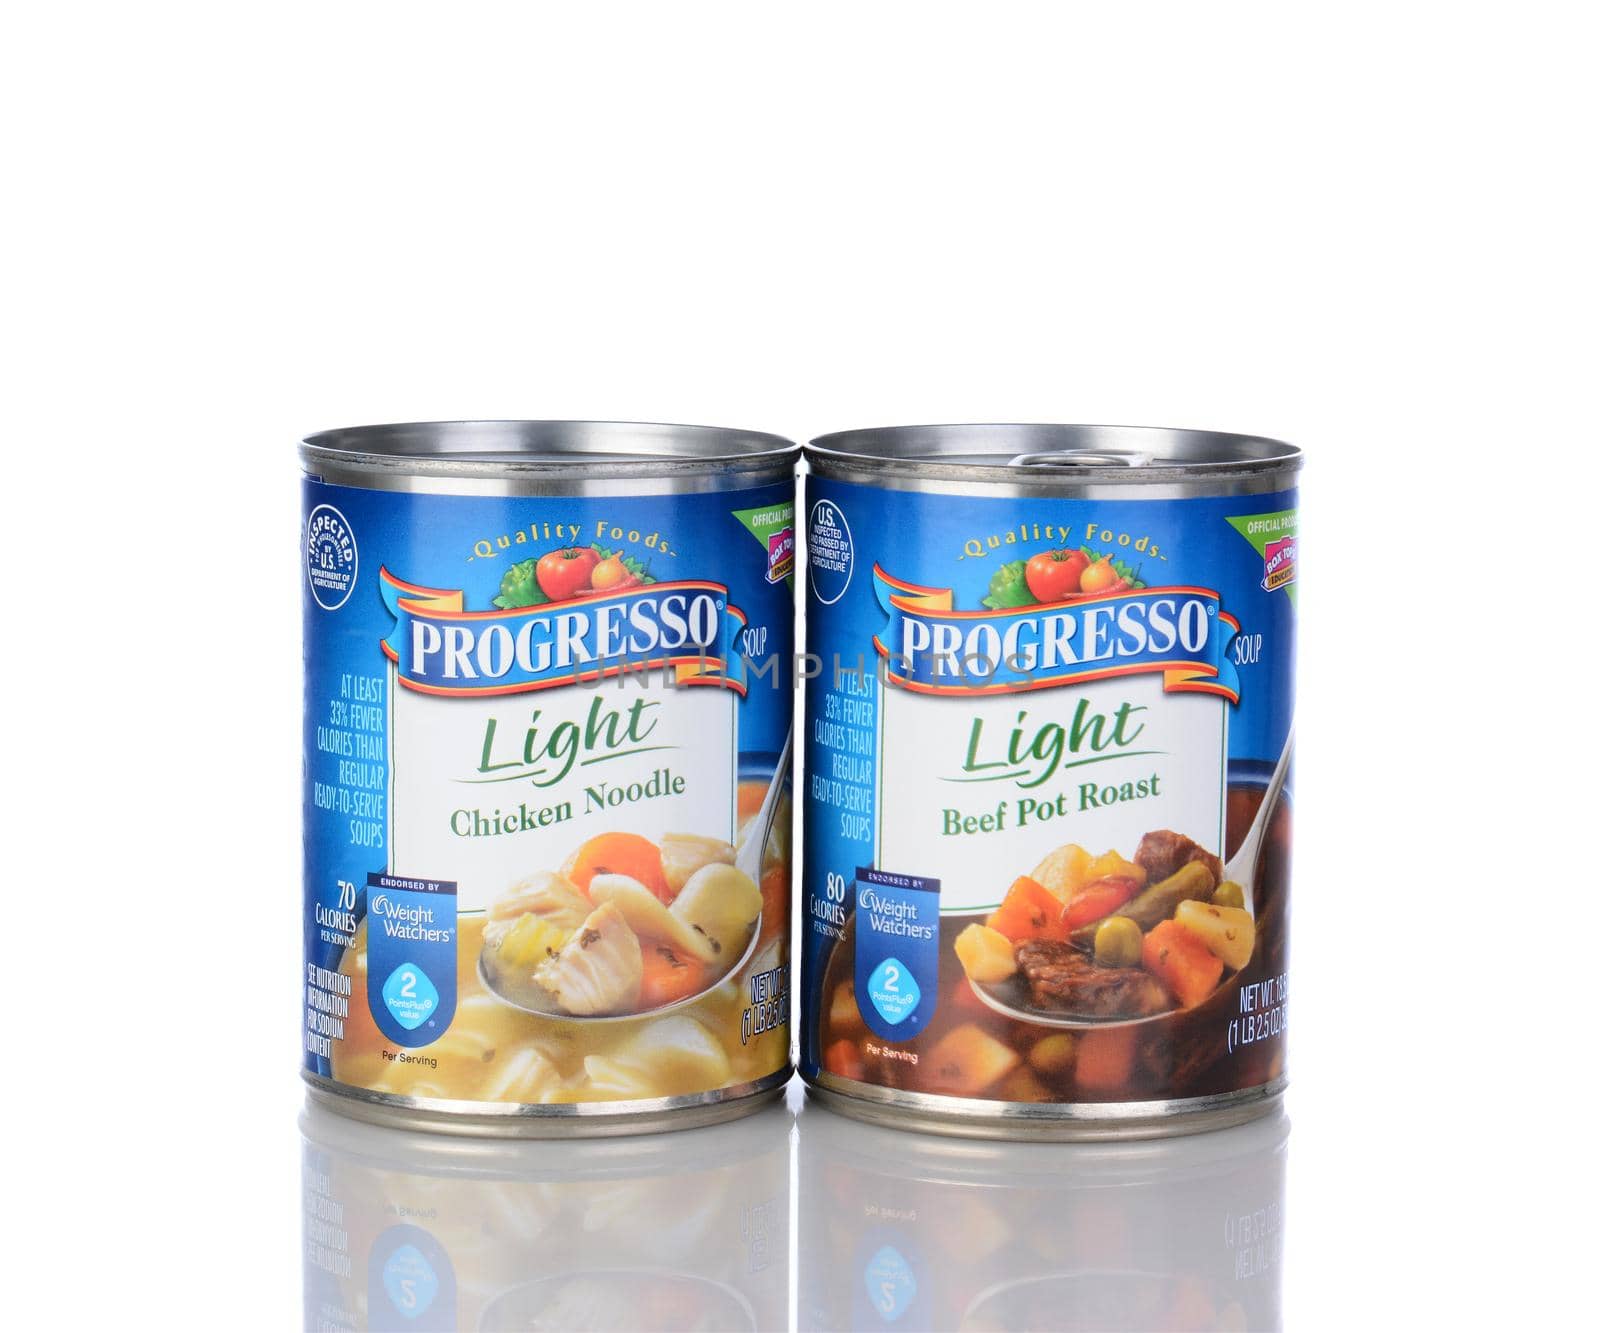 IRVINE, CA - January 05, 2014: A can of Progresso Light Beef Pot Roast Soup and Chicken Noodle. Progresso, owned by General Mills has been making soups for over 90 years.